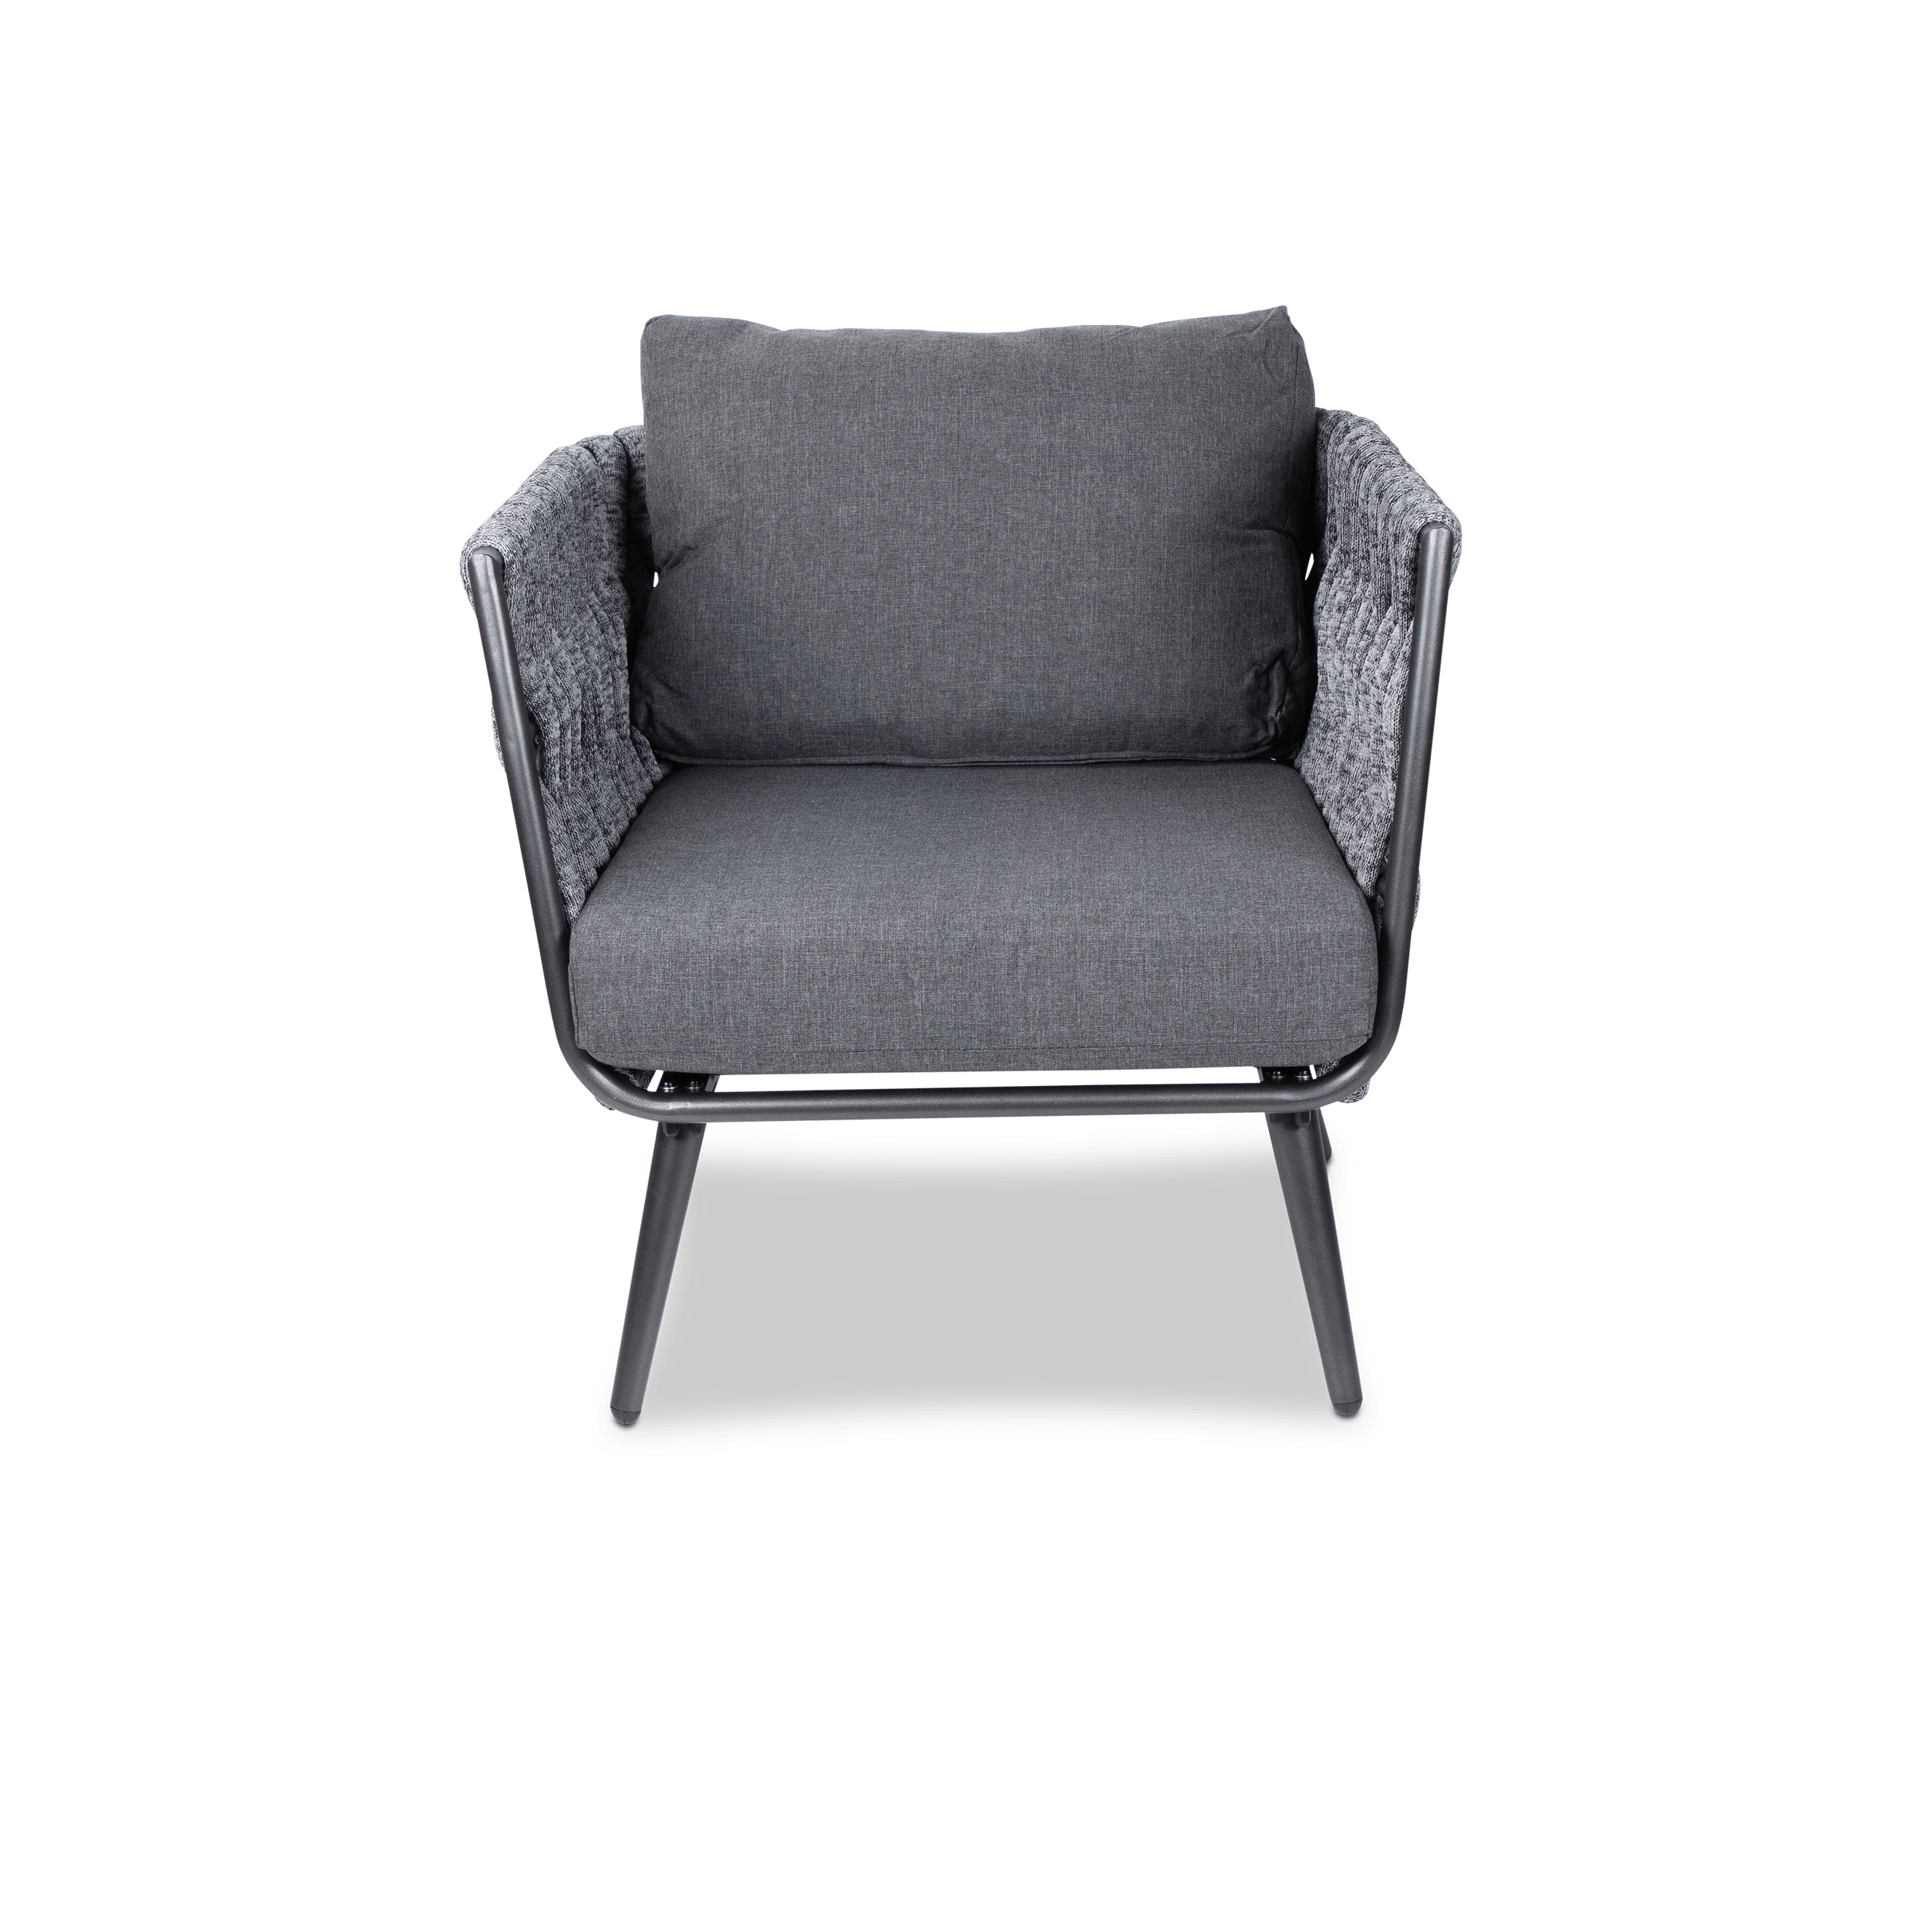 Montego & Mykonos Large 3pc Set in Gunmetal Grey with Charcoal Spun Poly Cushions and Midnight Fleck Olefin Rope - The Furniture Shack